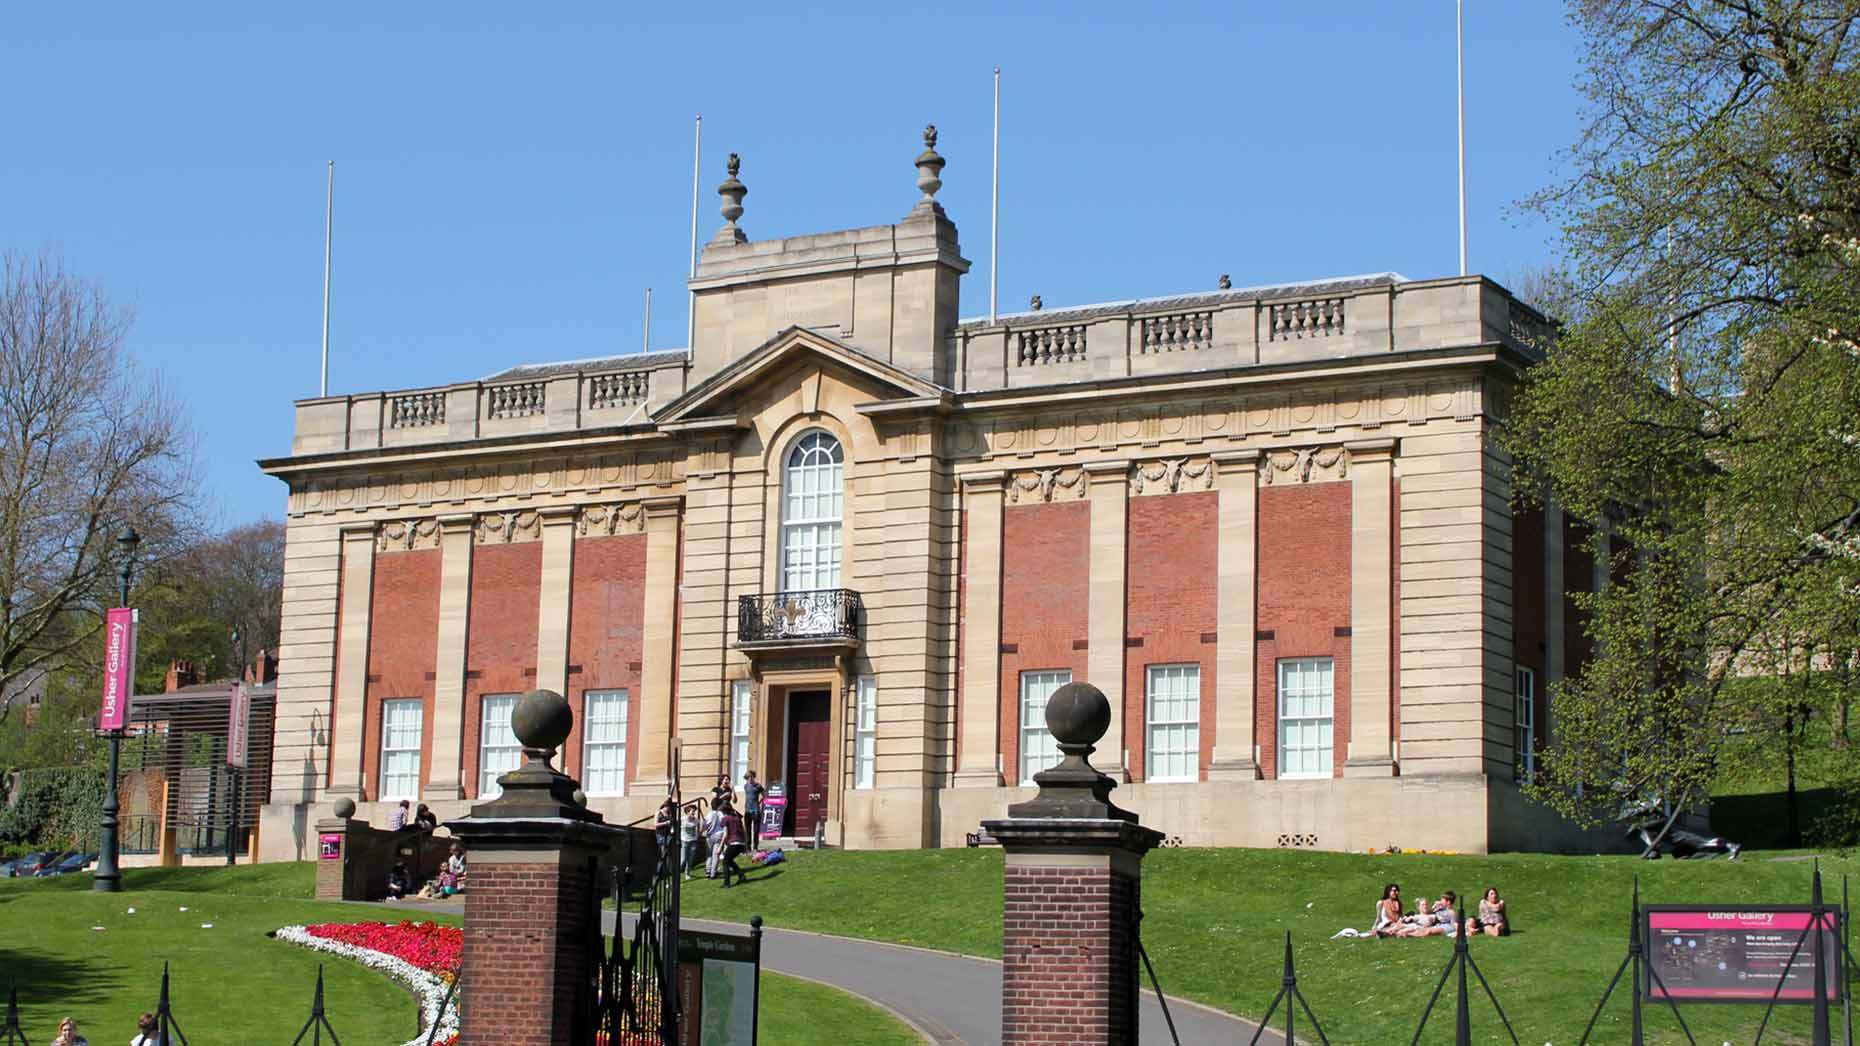 The Usher Gallery in Lincoln